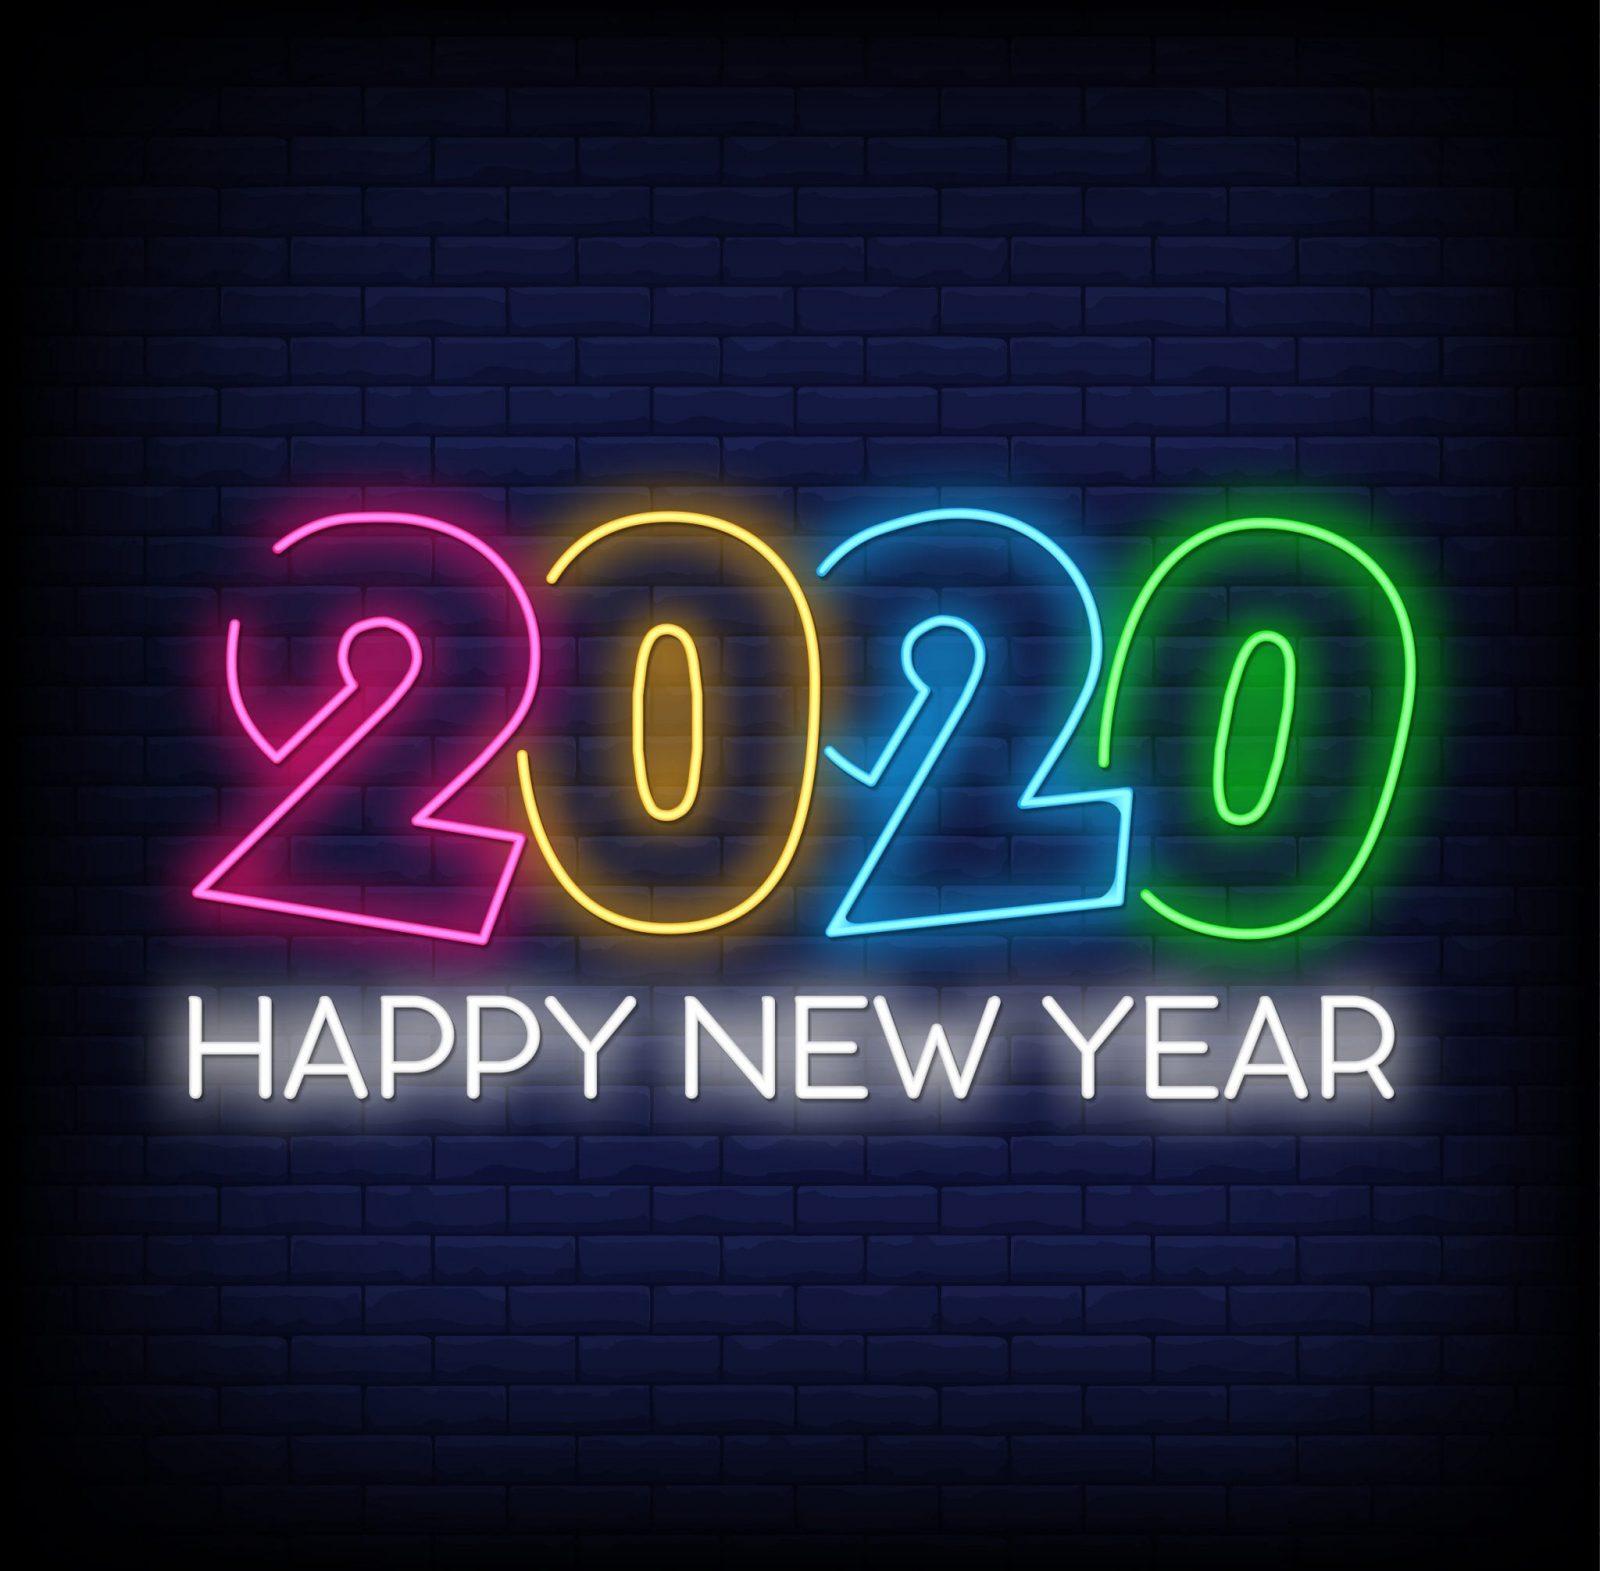 150+ New Year 2020 HD Wallpapers and Backgrounds